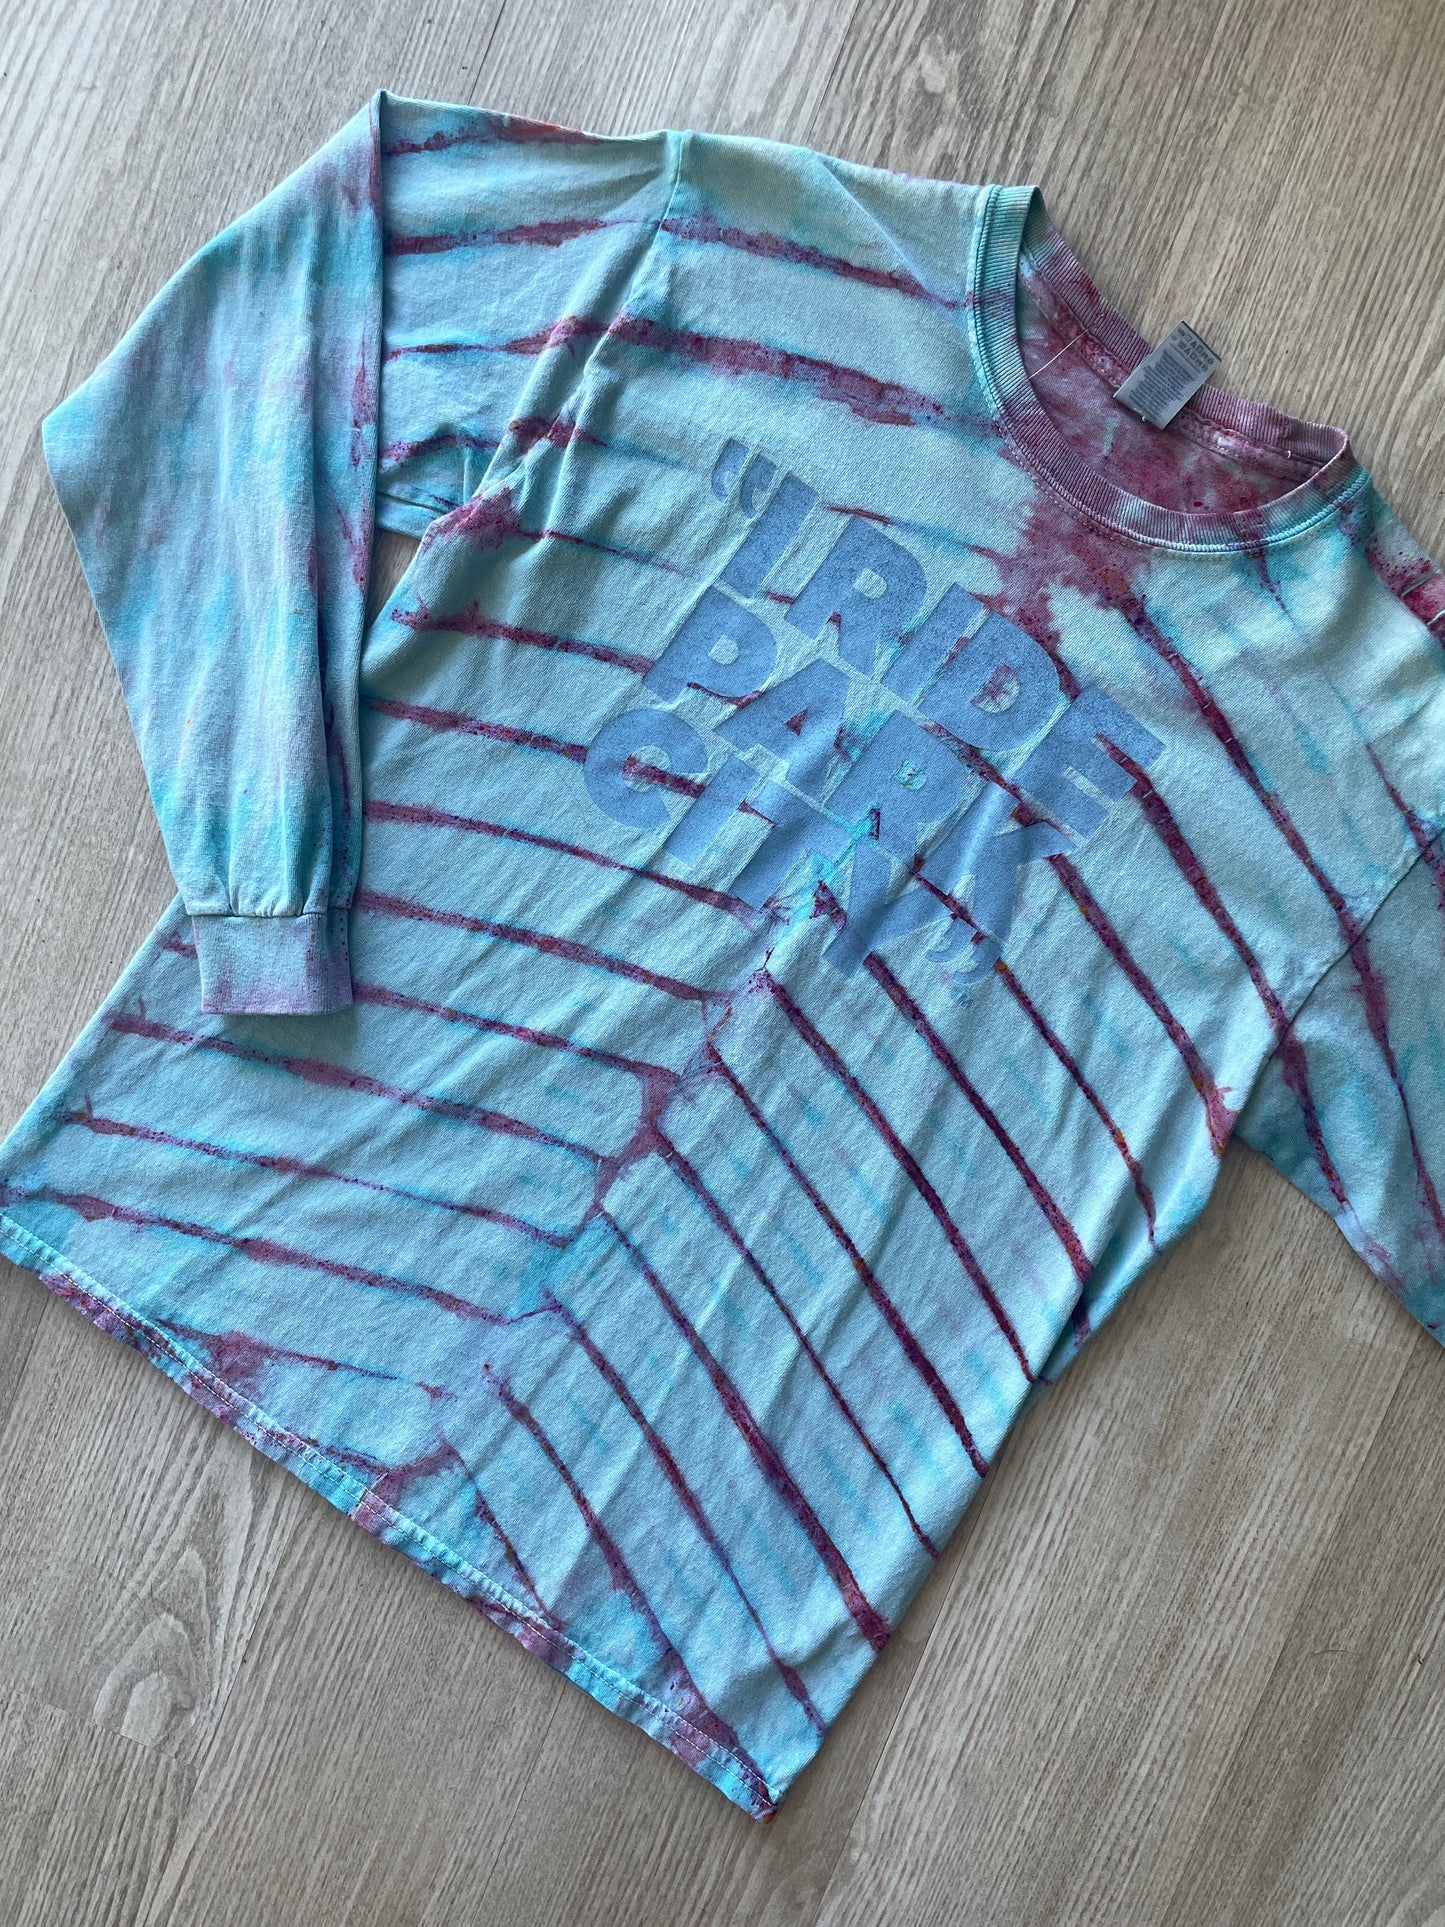 MEDIUM Men's "I Ride Park City" Handmade Tie Dye Long Sleeve Sleeve T-Shirt | One-Of-a-Kind Upcycled Pastel Pink and Blue Pleated Ski Top